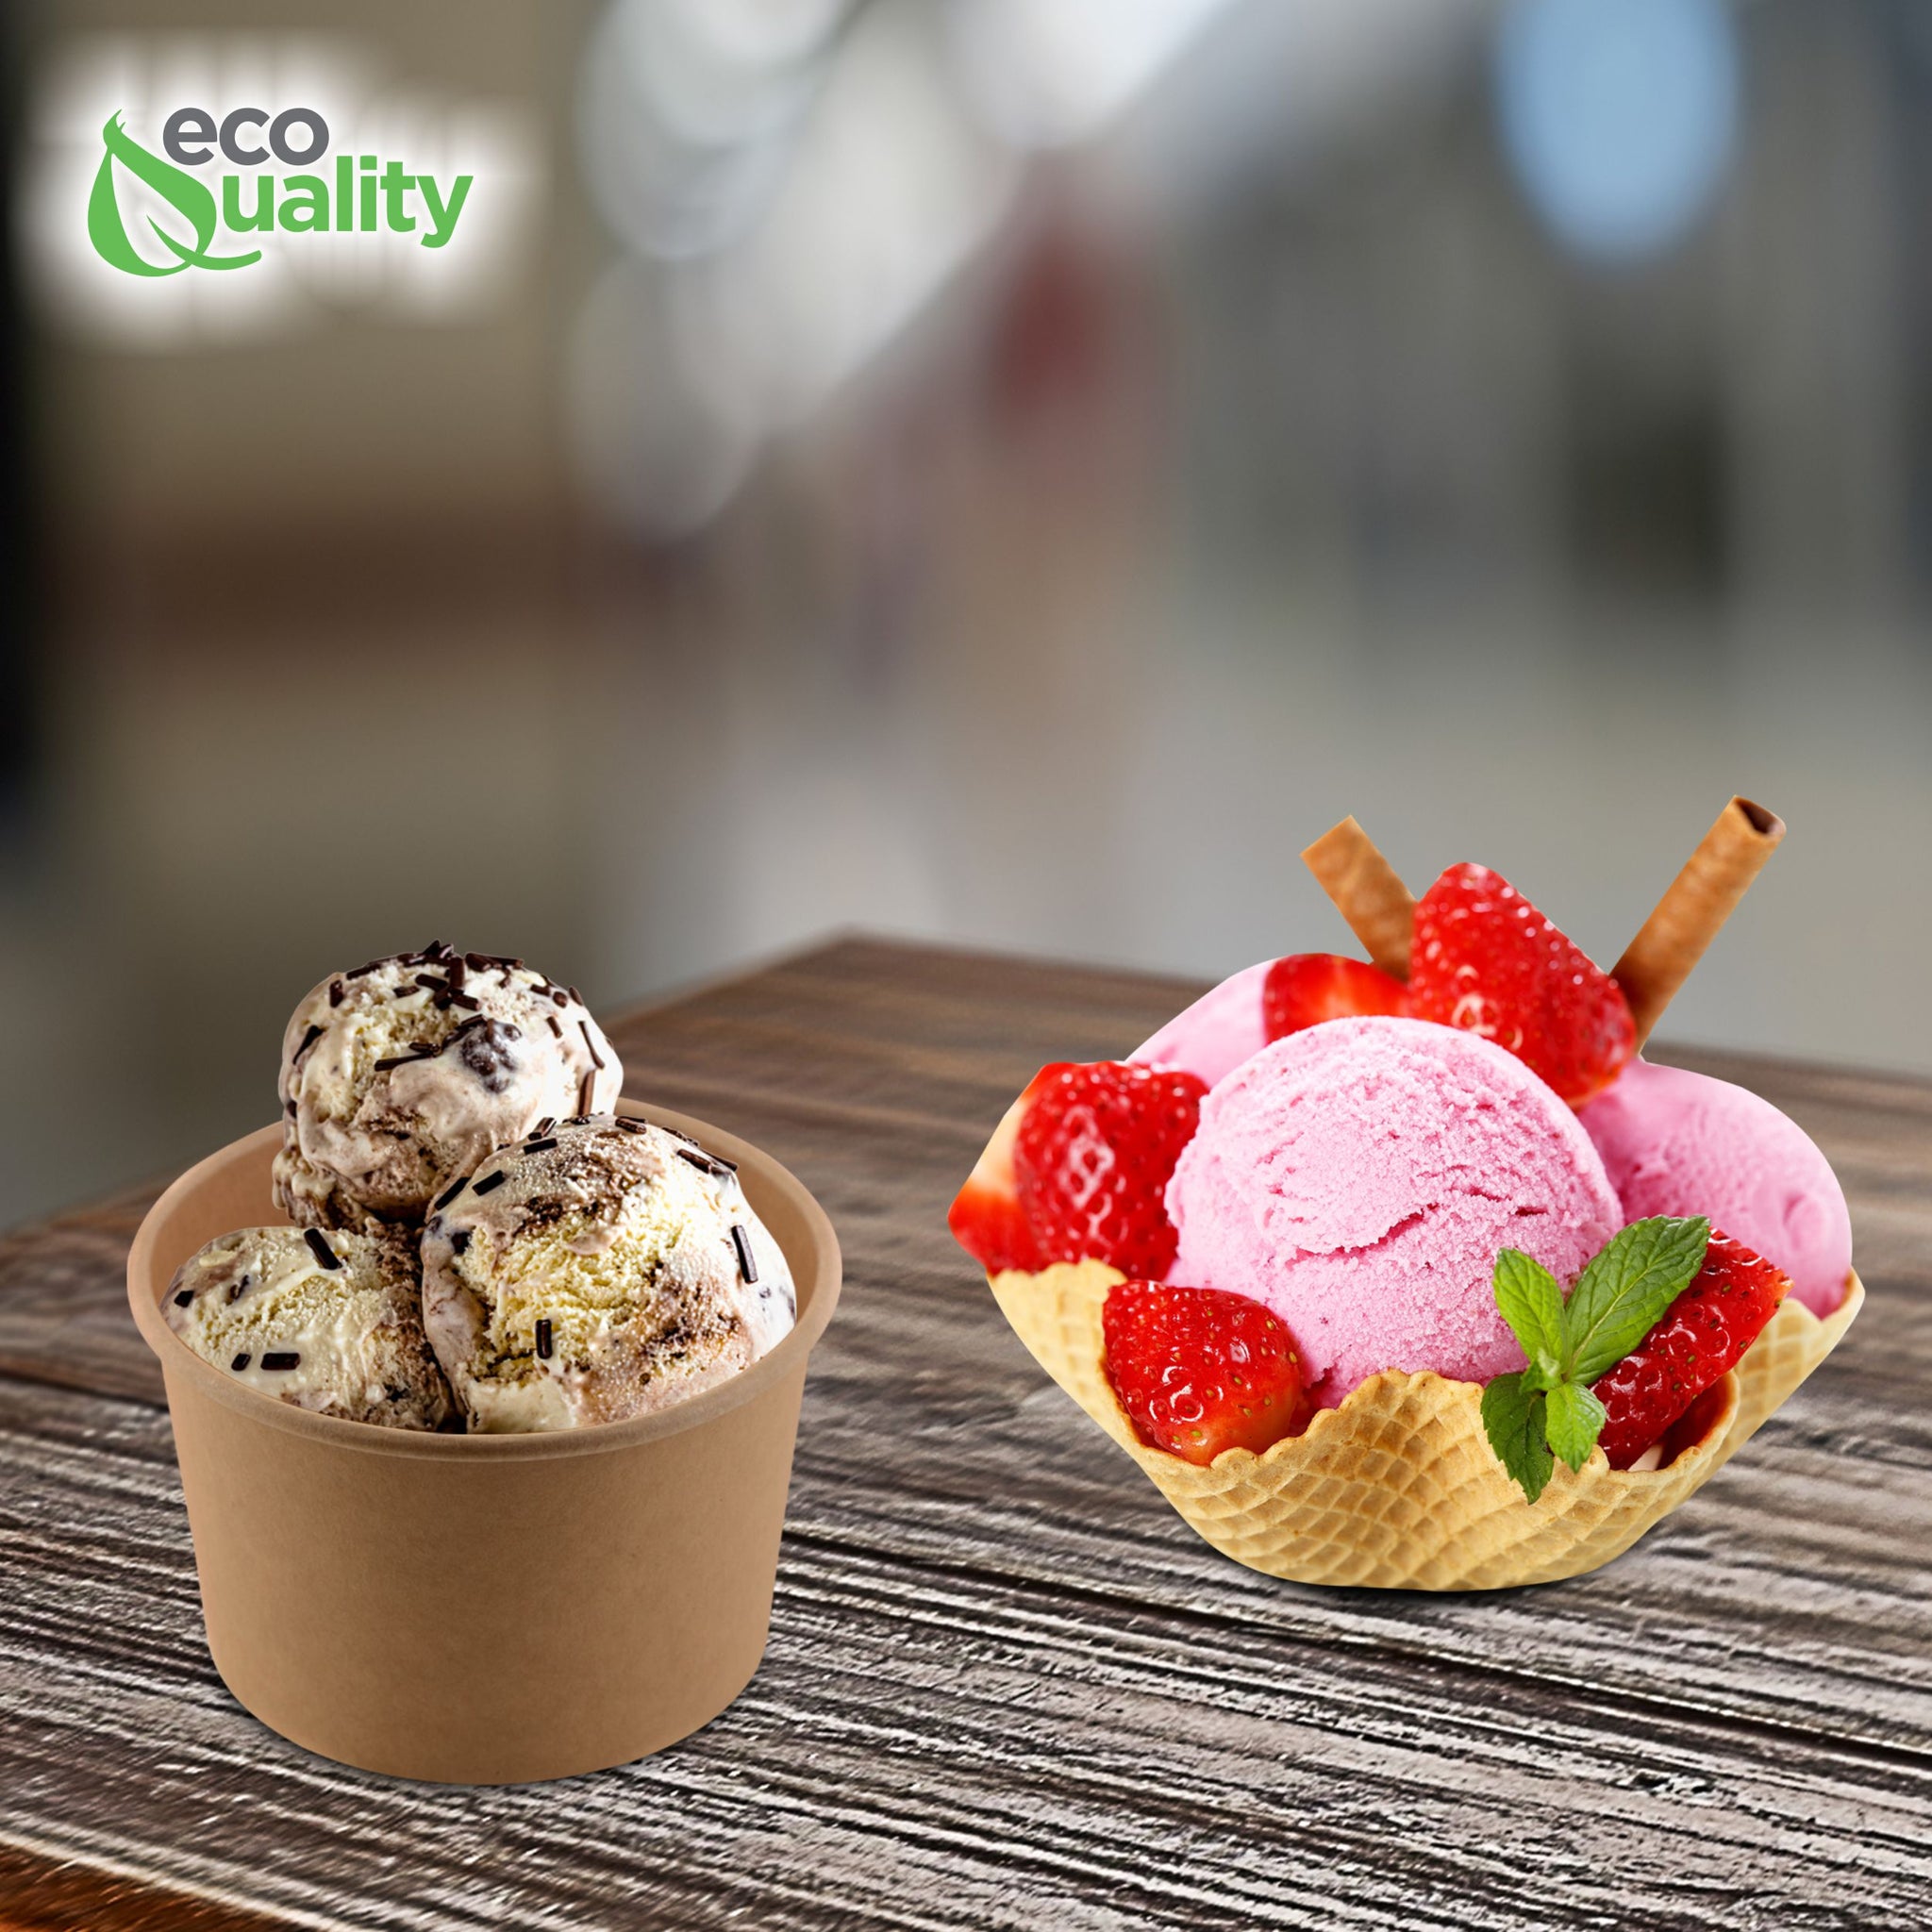 Ice cream soup yogurt cups Take out food container Nyc  Restaurant cafe shop office home disposable catering supplies kraft Paper heavy duty strong sturdy leak free proof   bulk economical wholesale ecoquality Ecofriendly compostable biodegradable  8oz 8 ounces